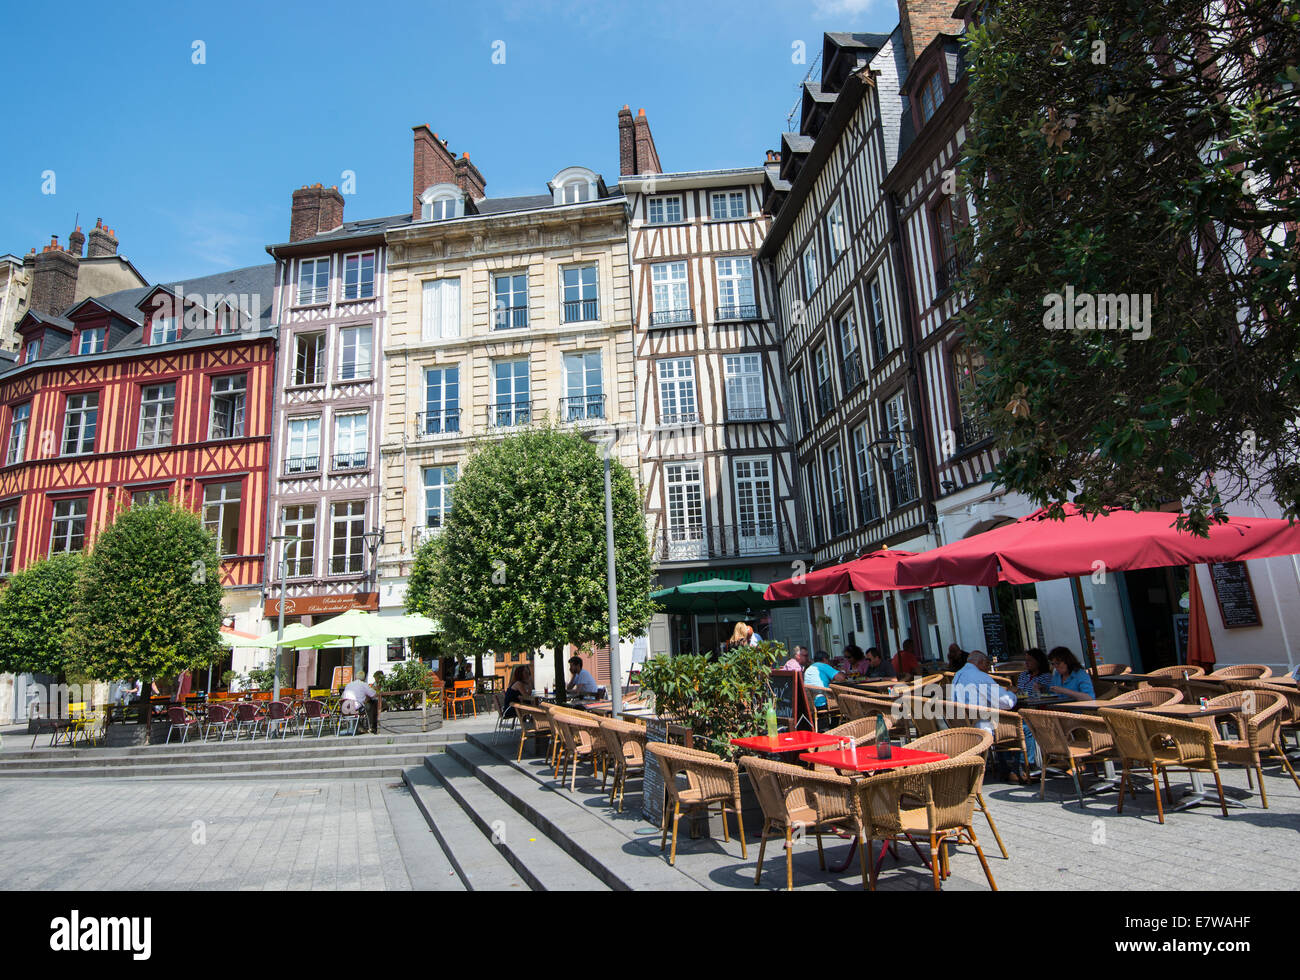 Summer day in Rouen, France Europe Stock Photo